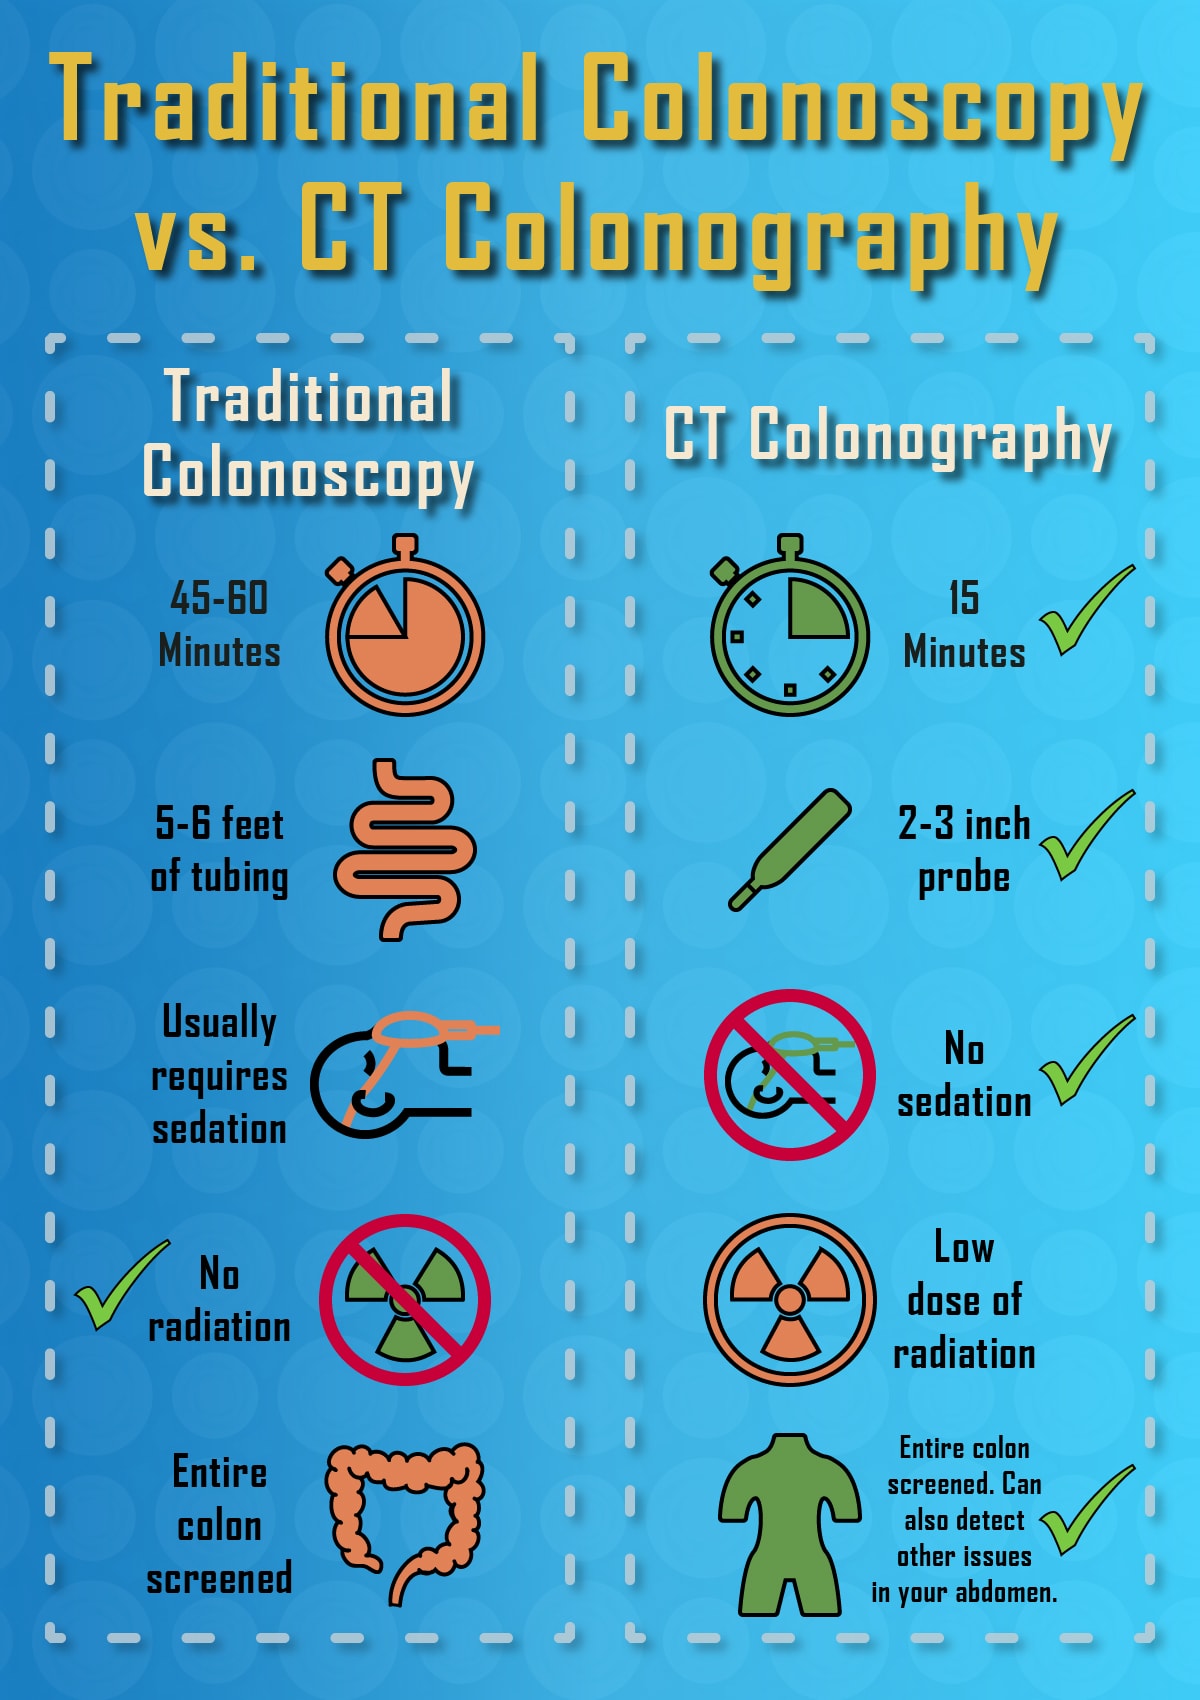 An infographic comparing traditional colonoscopy with CT Colonography. Traditional Colonoscopy: 45-60 minutes; 5-6 feet of tubing; Usually requires sedation; No radiation; Entire colon screened. CT Colonography: 15 minutes; 2-3 inch probe; No sedation; Low dose of radiation; Entire colon screened. Can also detect other issues in your abdomen.